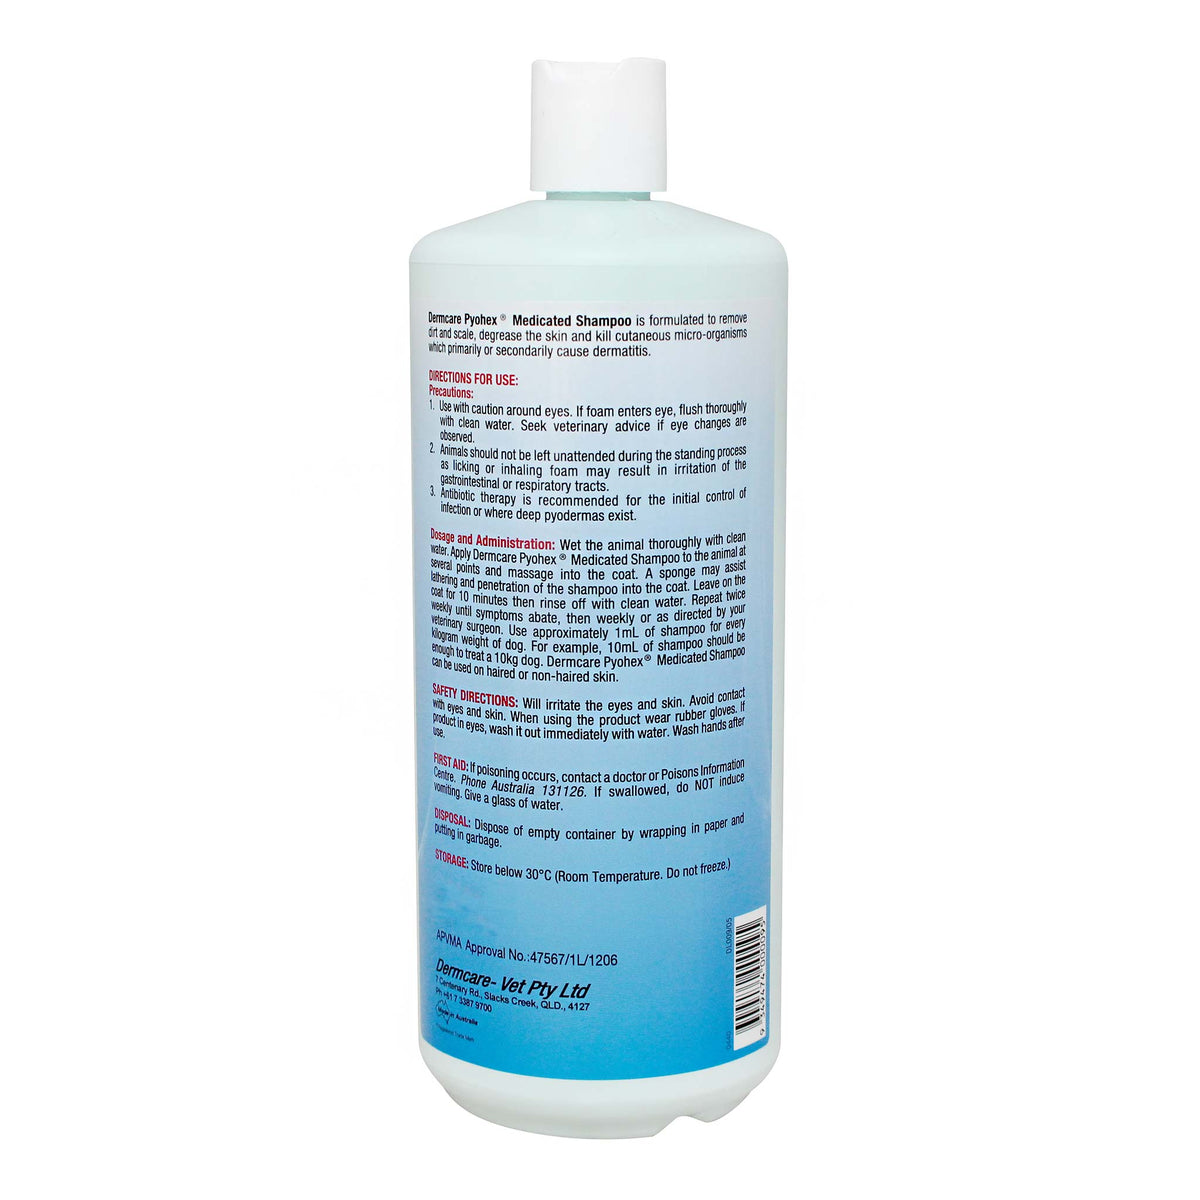 Pyohex Medicated Shampoo for Bacterial Skin Infections in Dogs